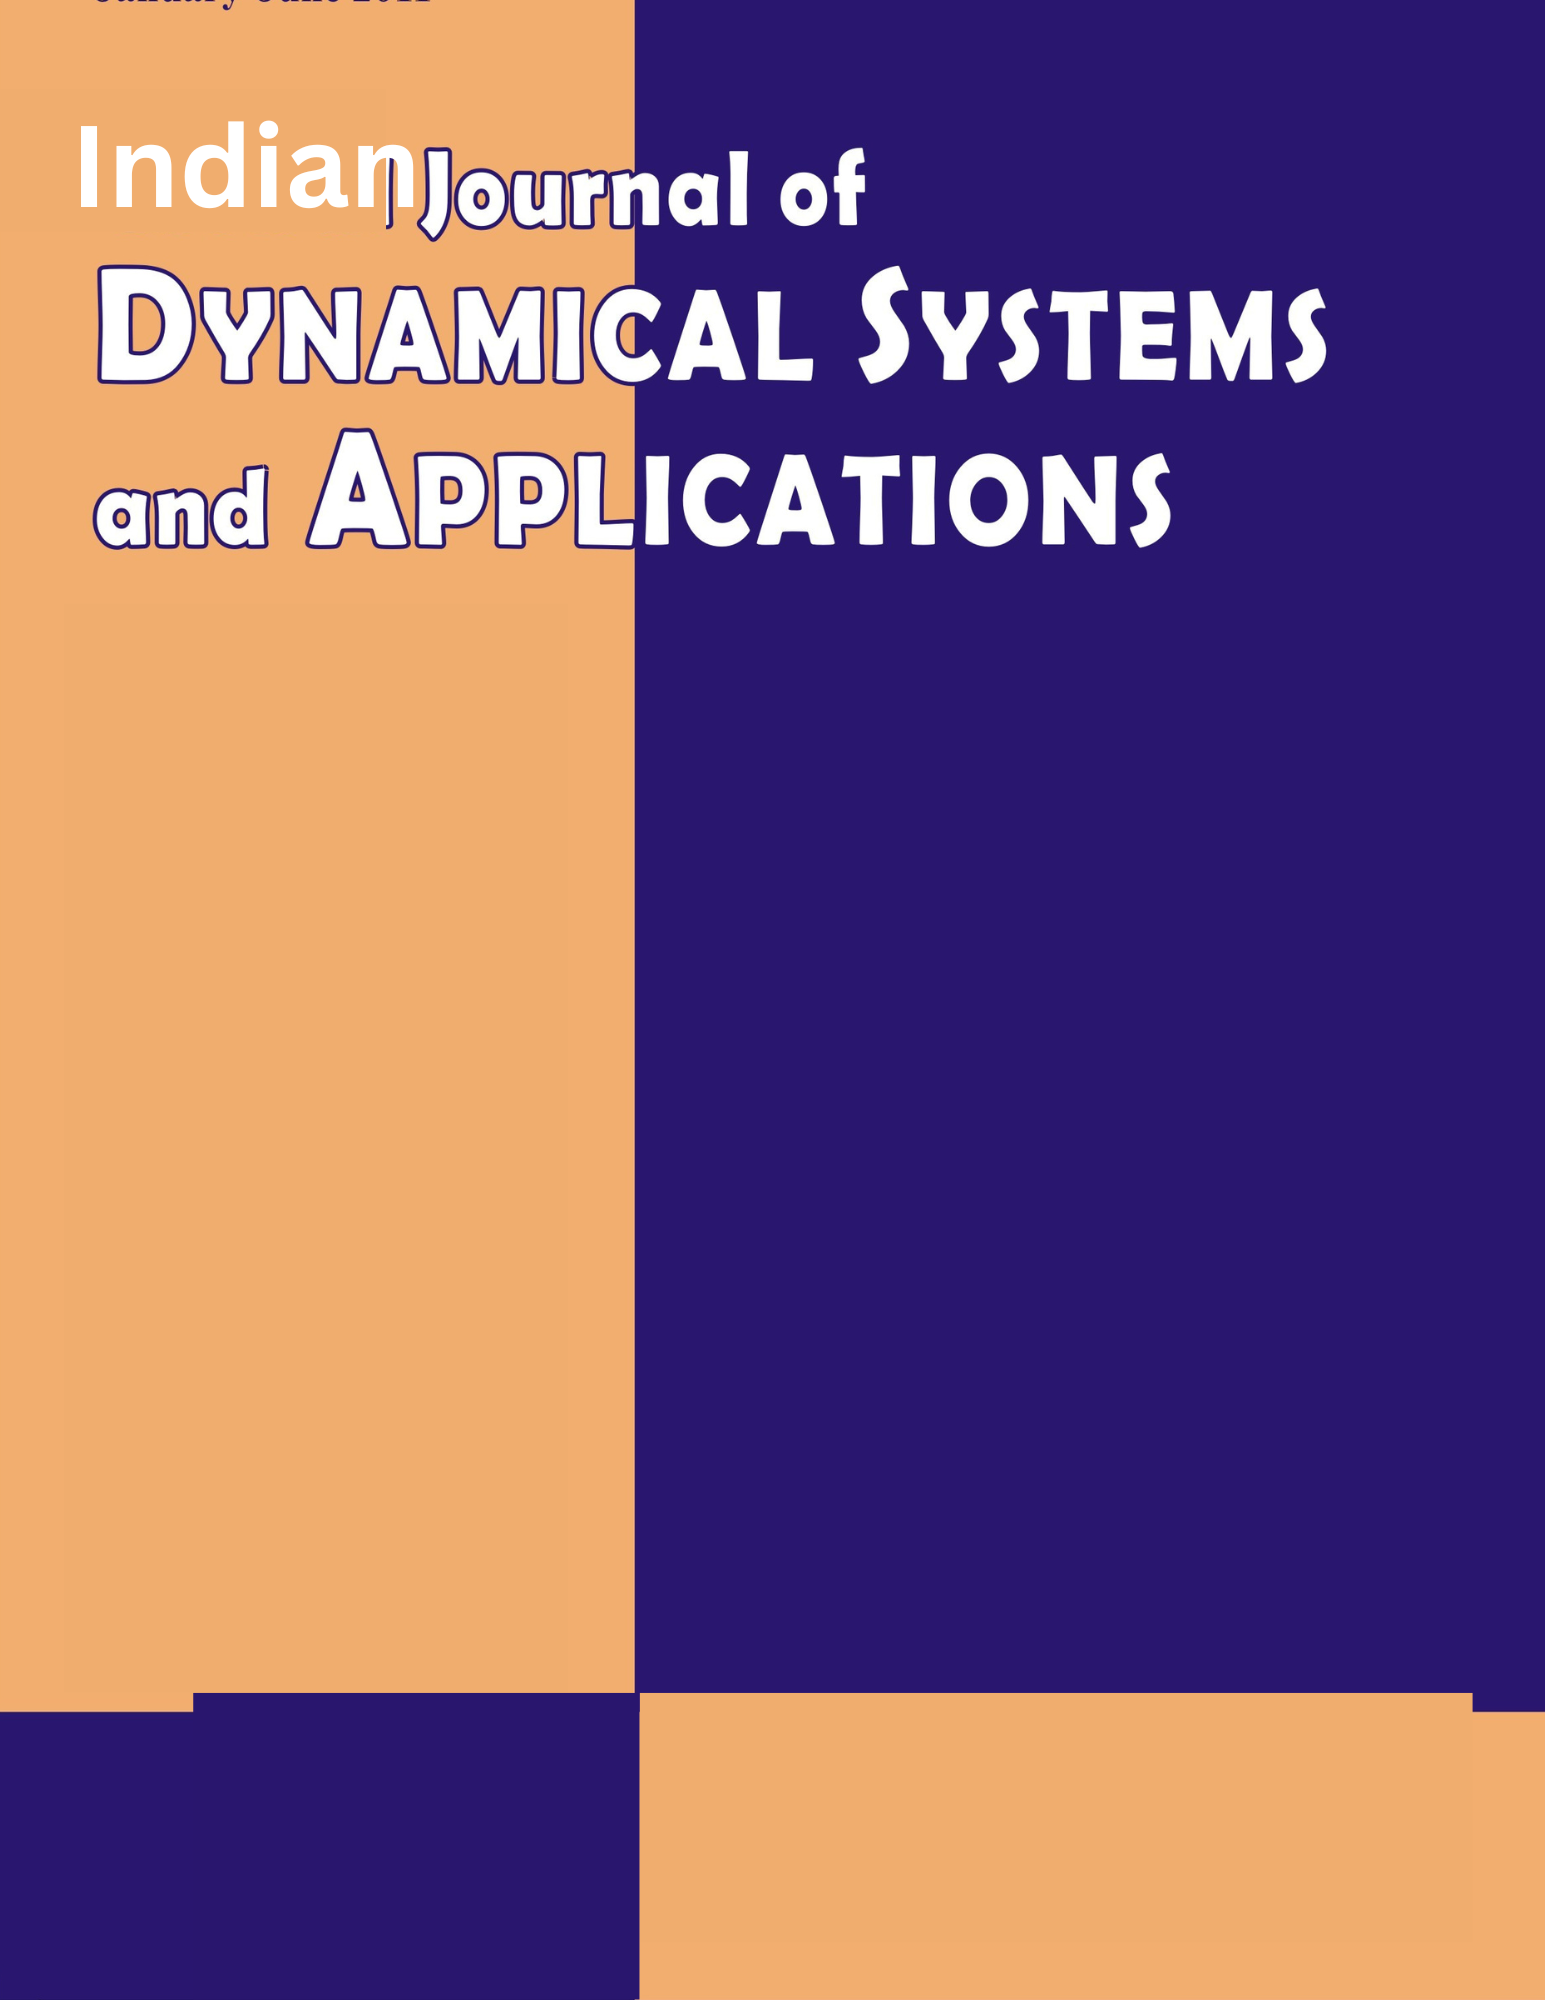 Indian Journal of Dynamical Systems and Applications